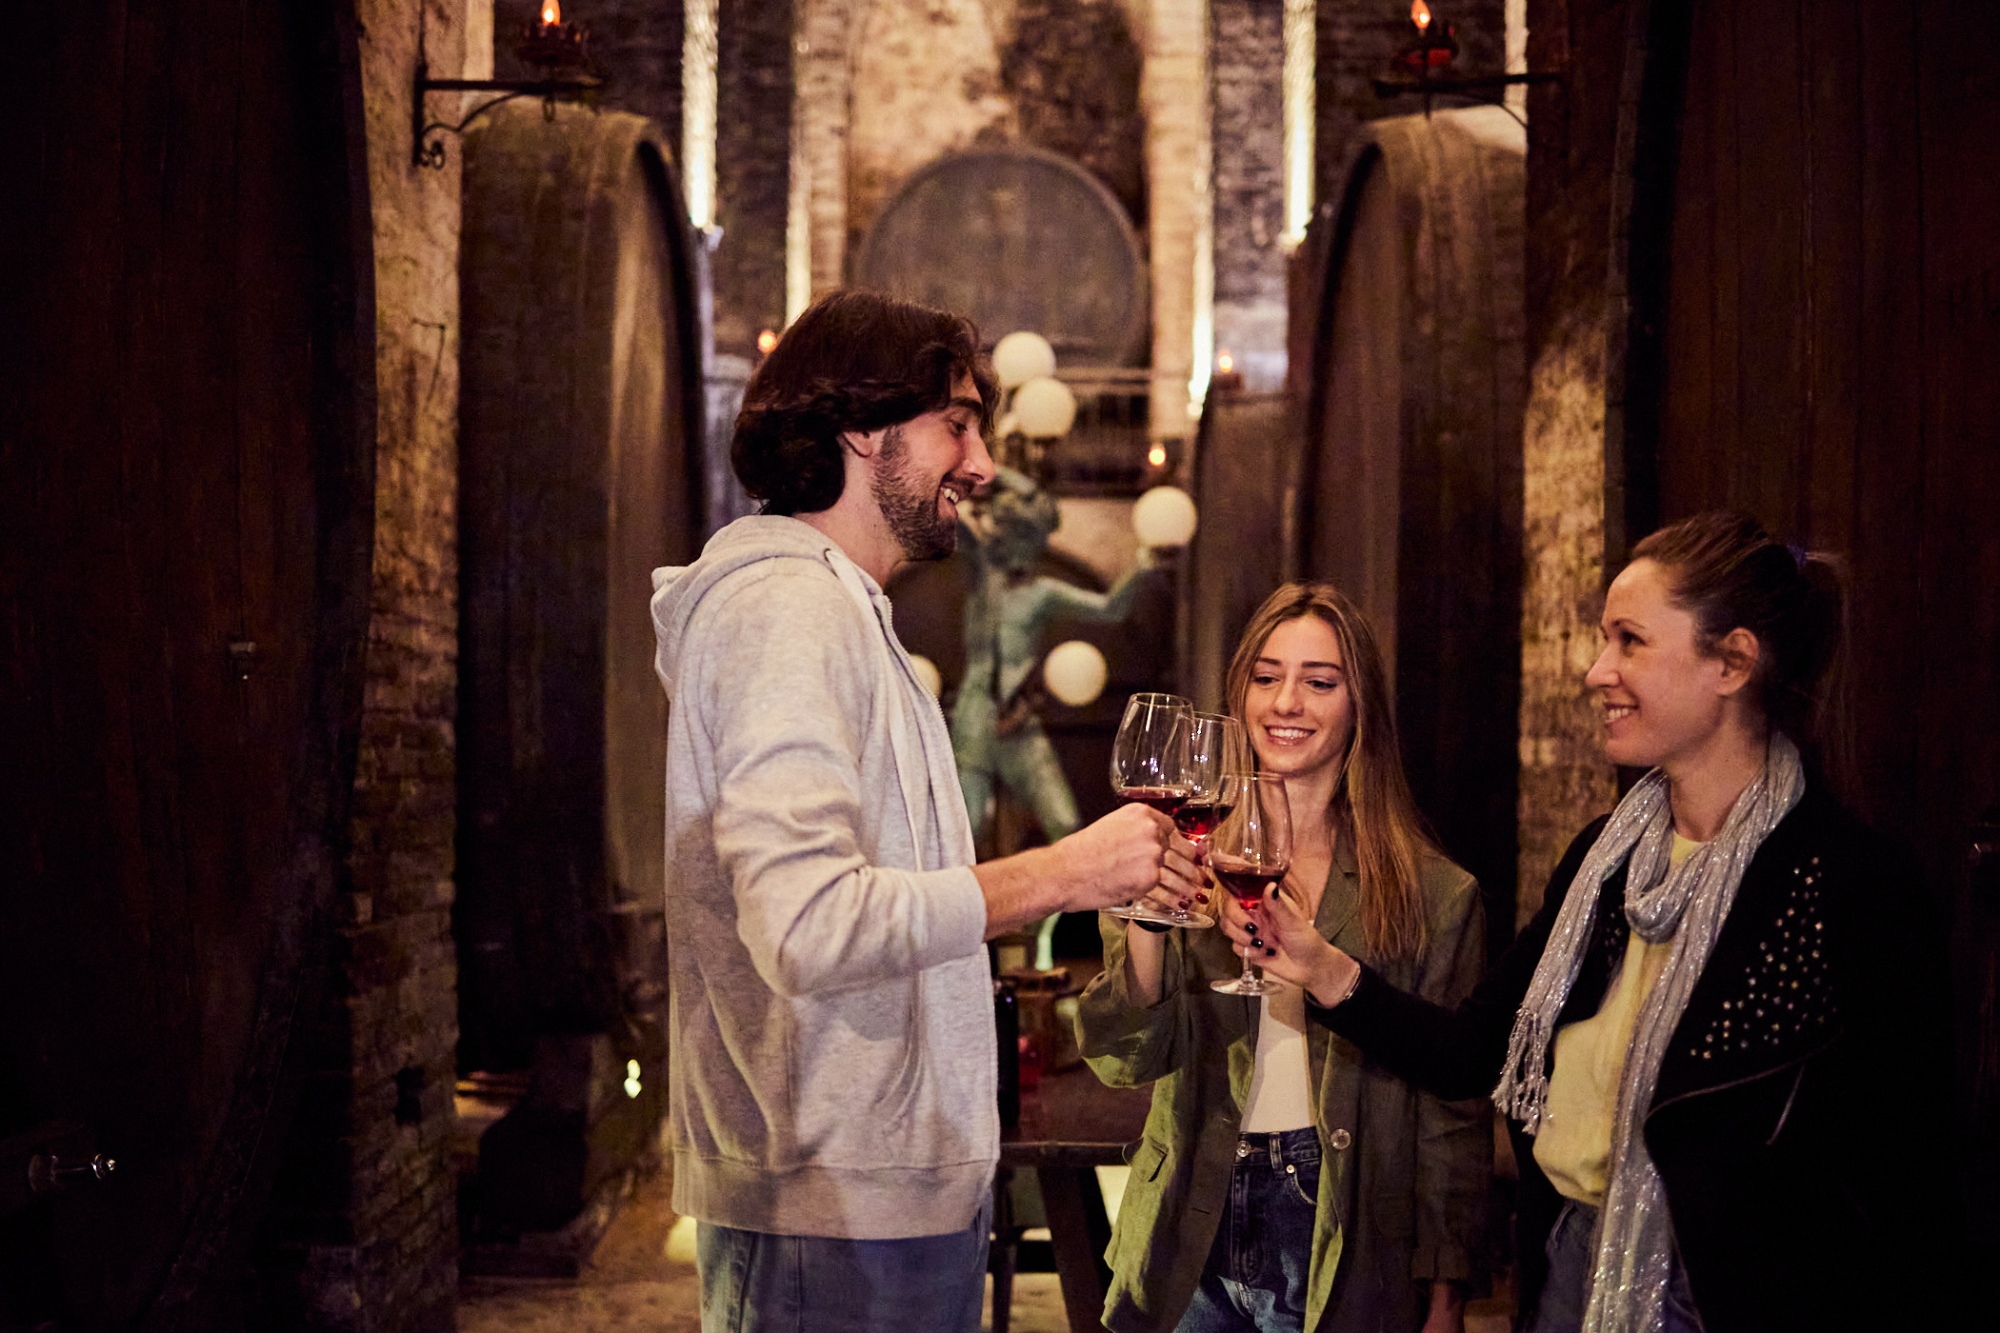 Wine lovers experience in Montepulciano